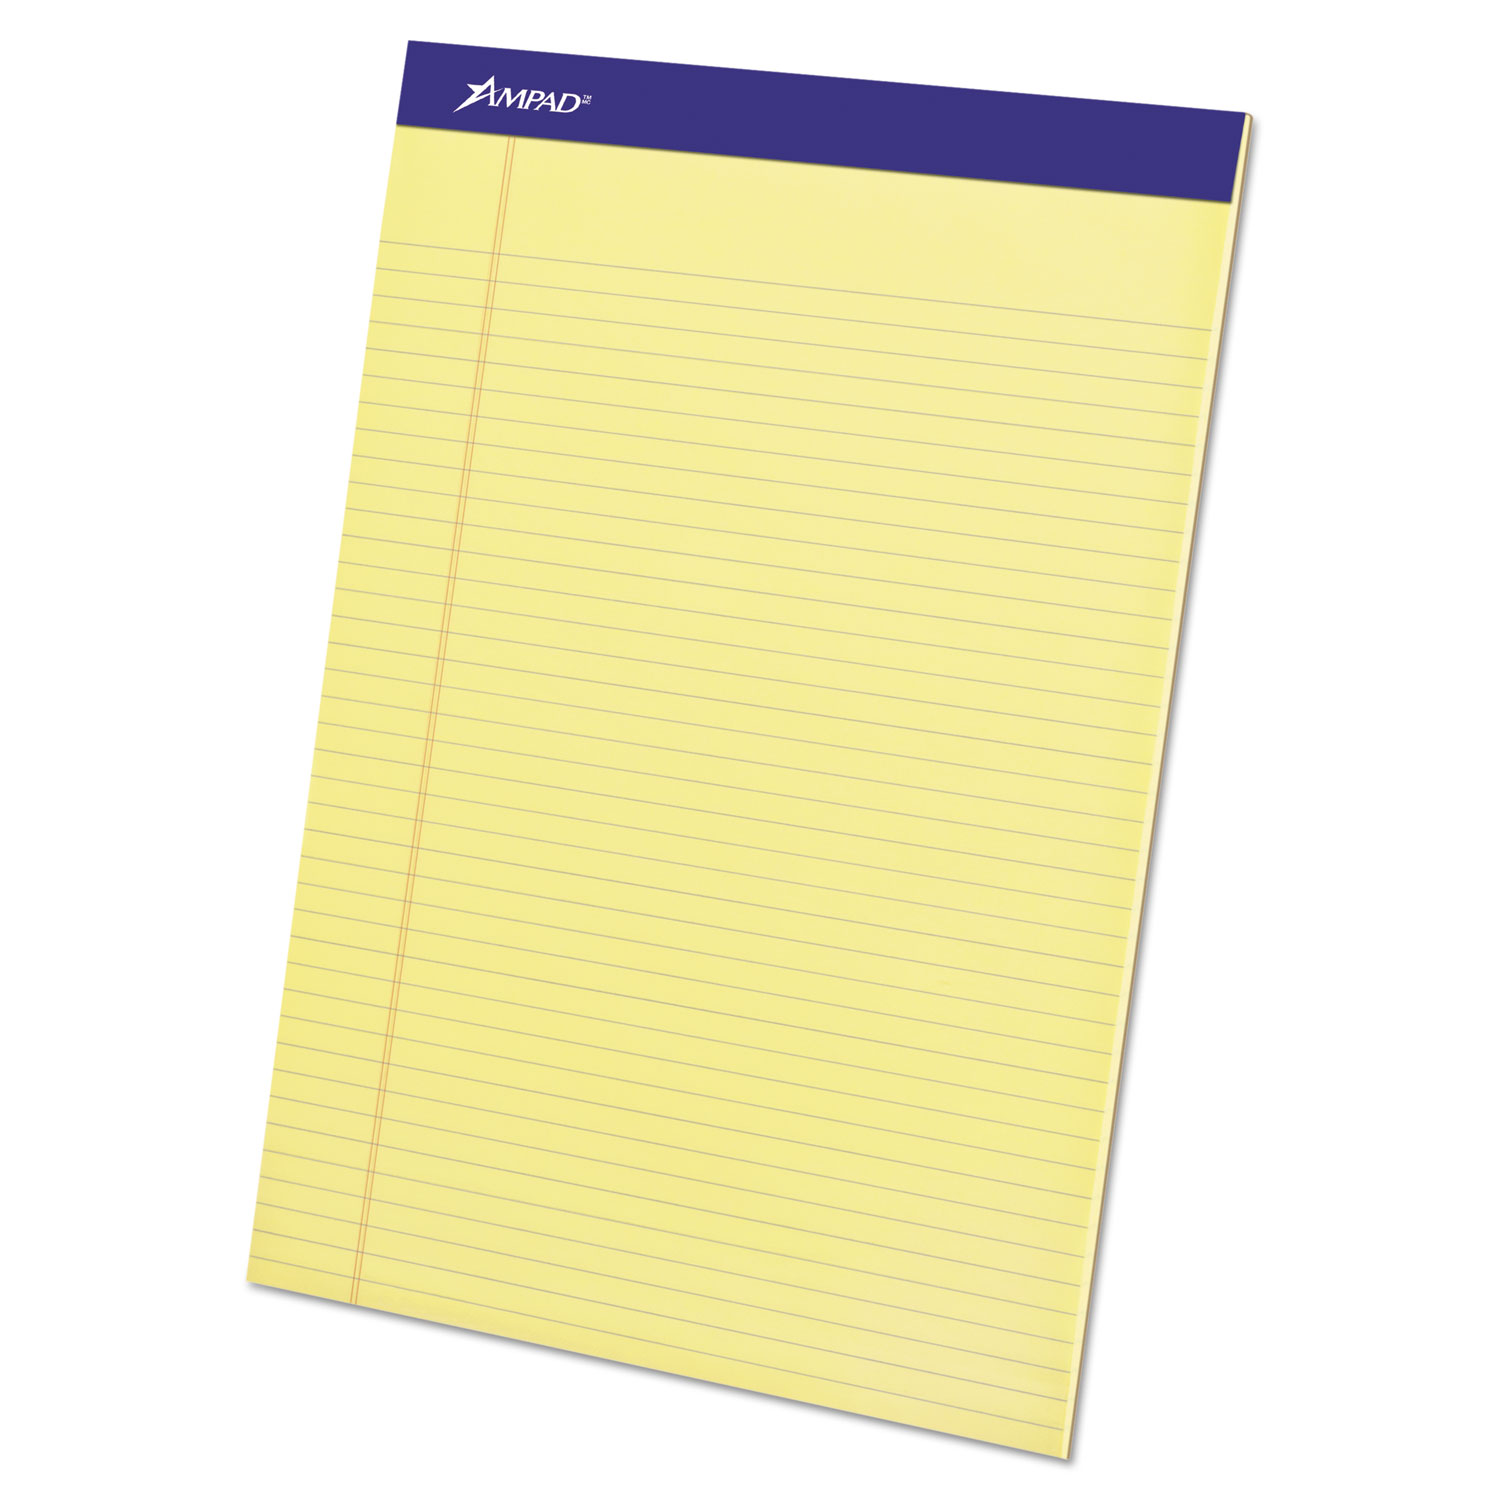  Ampad 20-222 Perforated Writing Pads, Narrow Rule, 8.5 x 11.75, Canary, 50 Sheets, Dozen (TOP20222) 